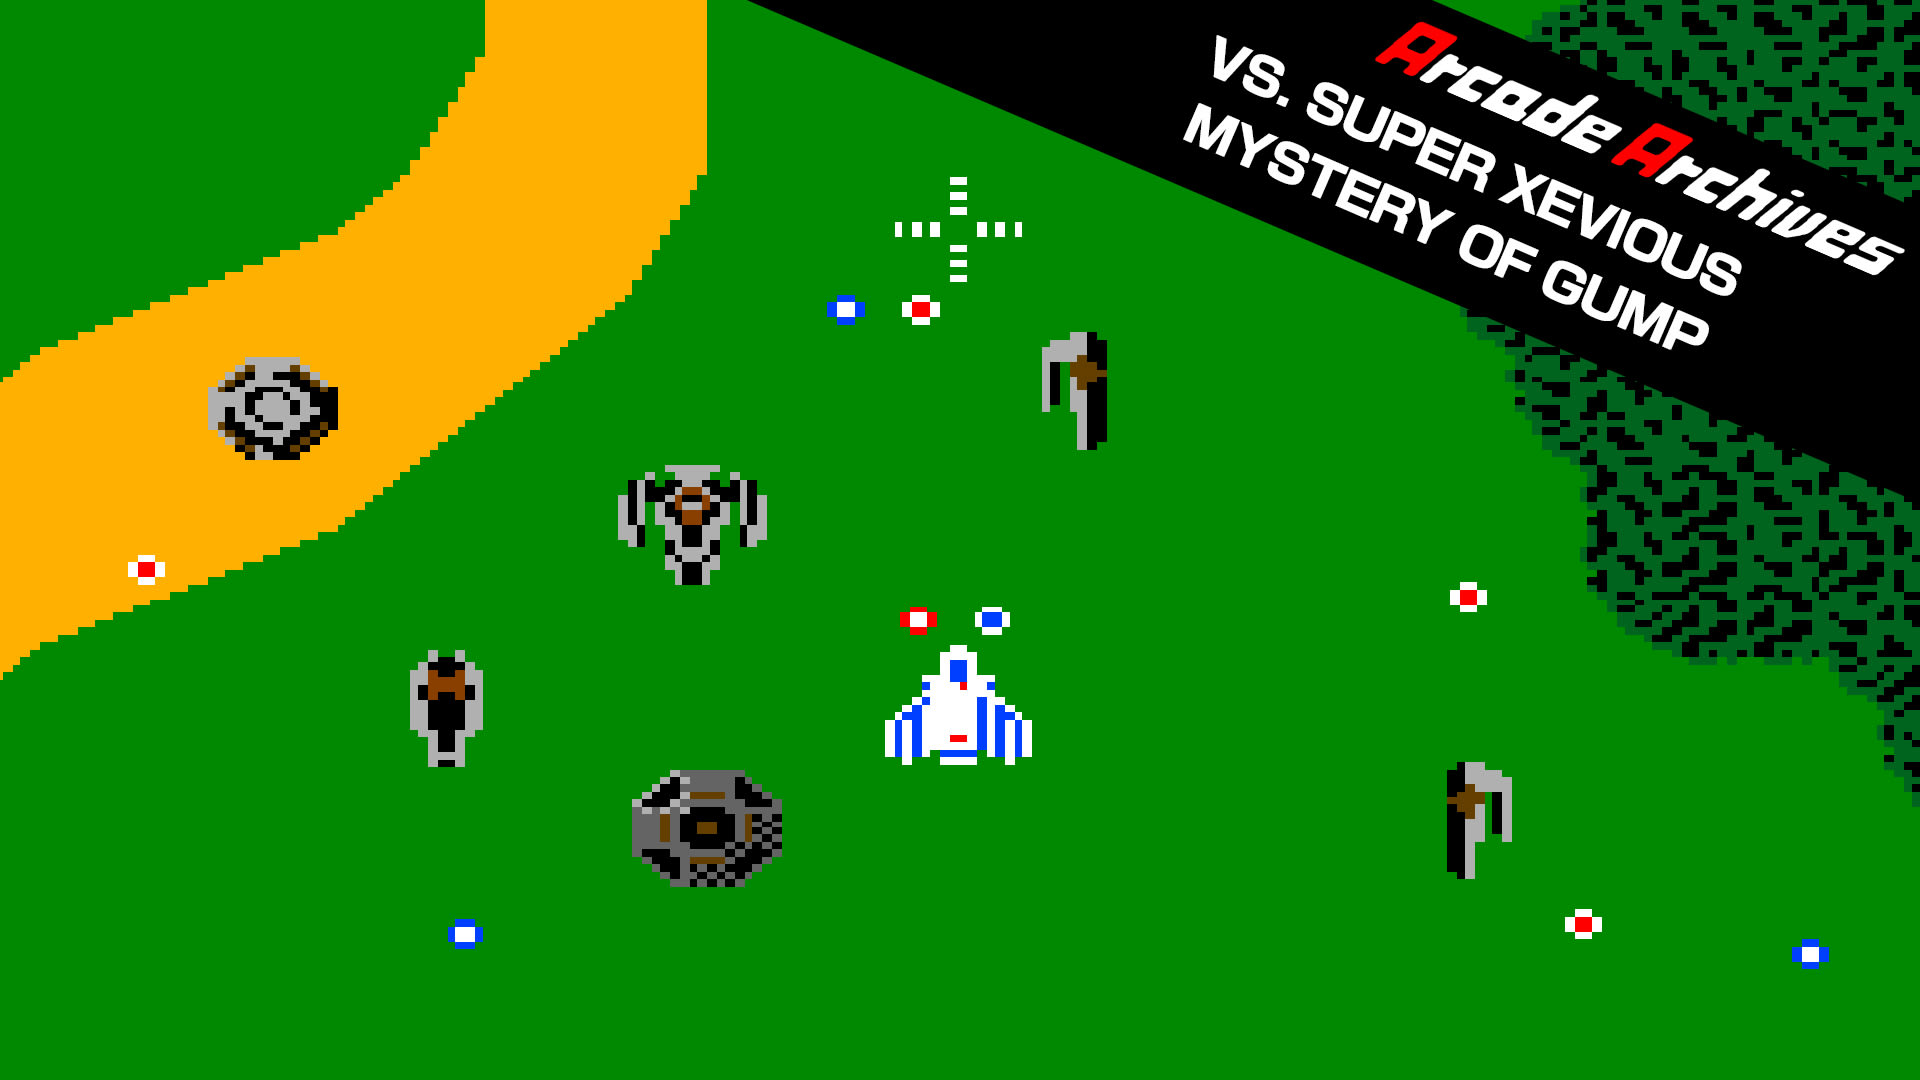 Arcade Archives VS. SUPER XEVIOUS MYSTERY OF GUMP 1